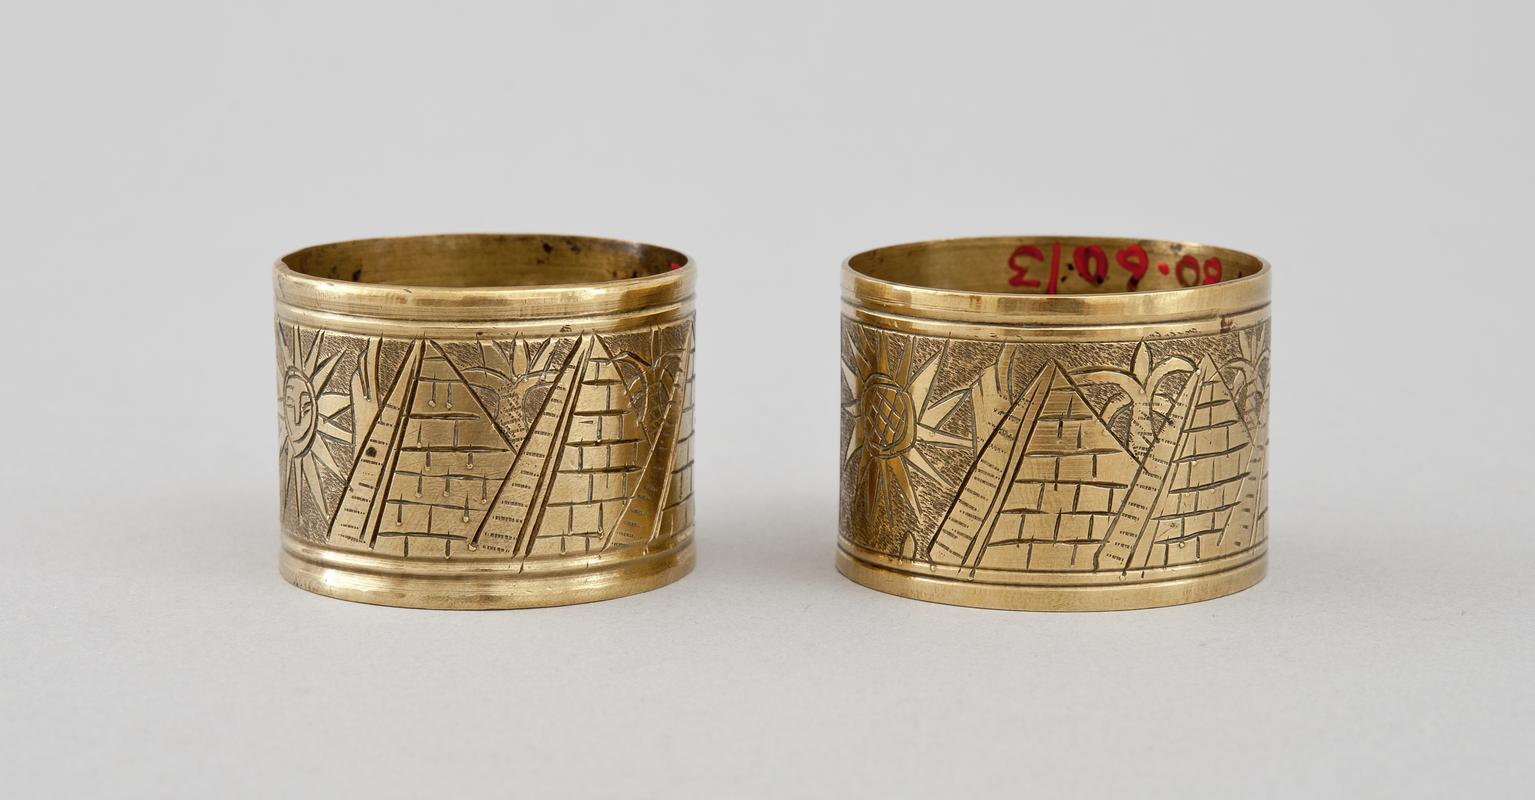 Brass napkin ring made from a shell case. Engraved with Egyptian motifs of pyramids and sphinx.